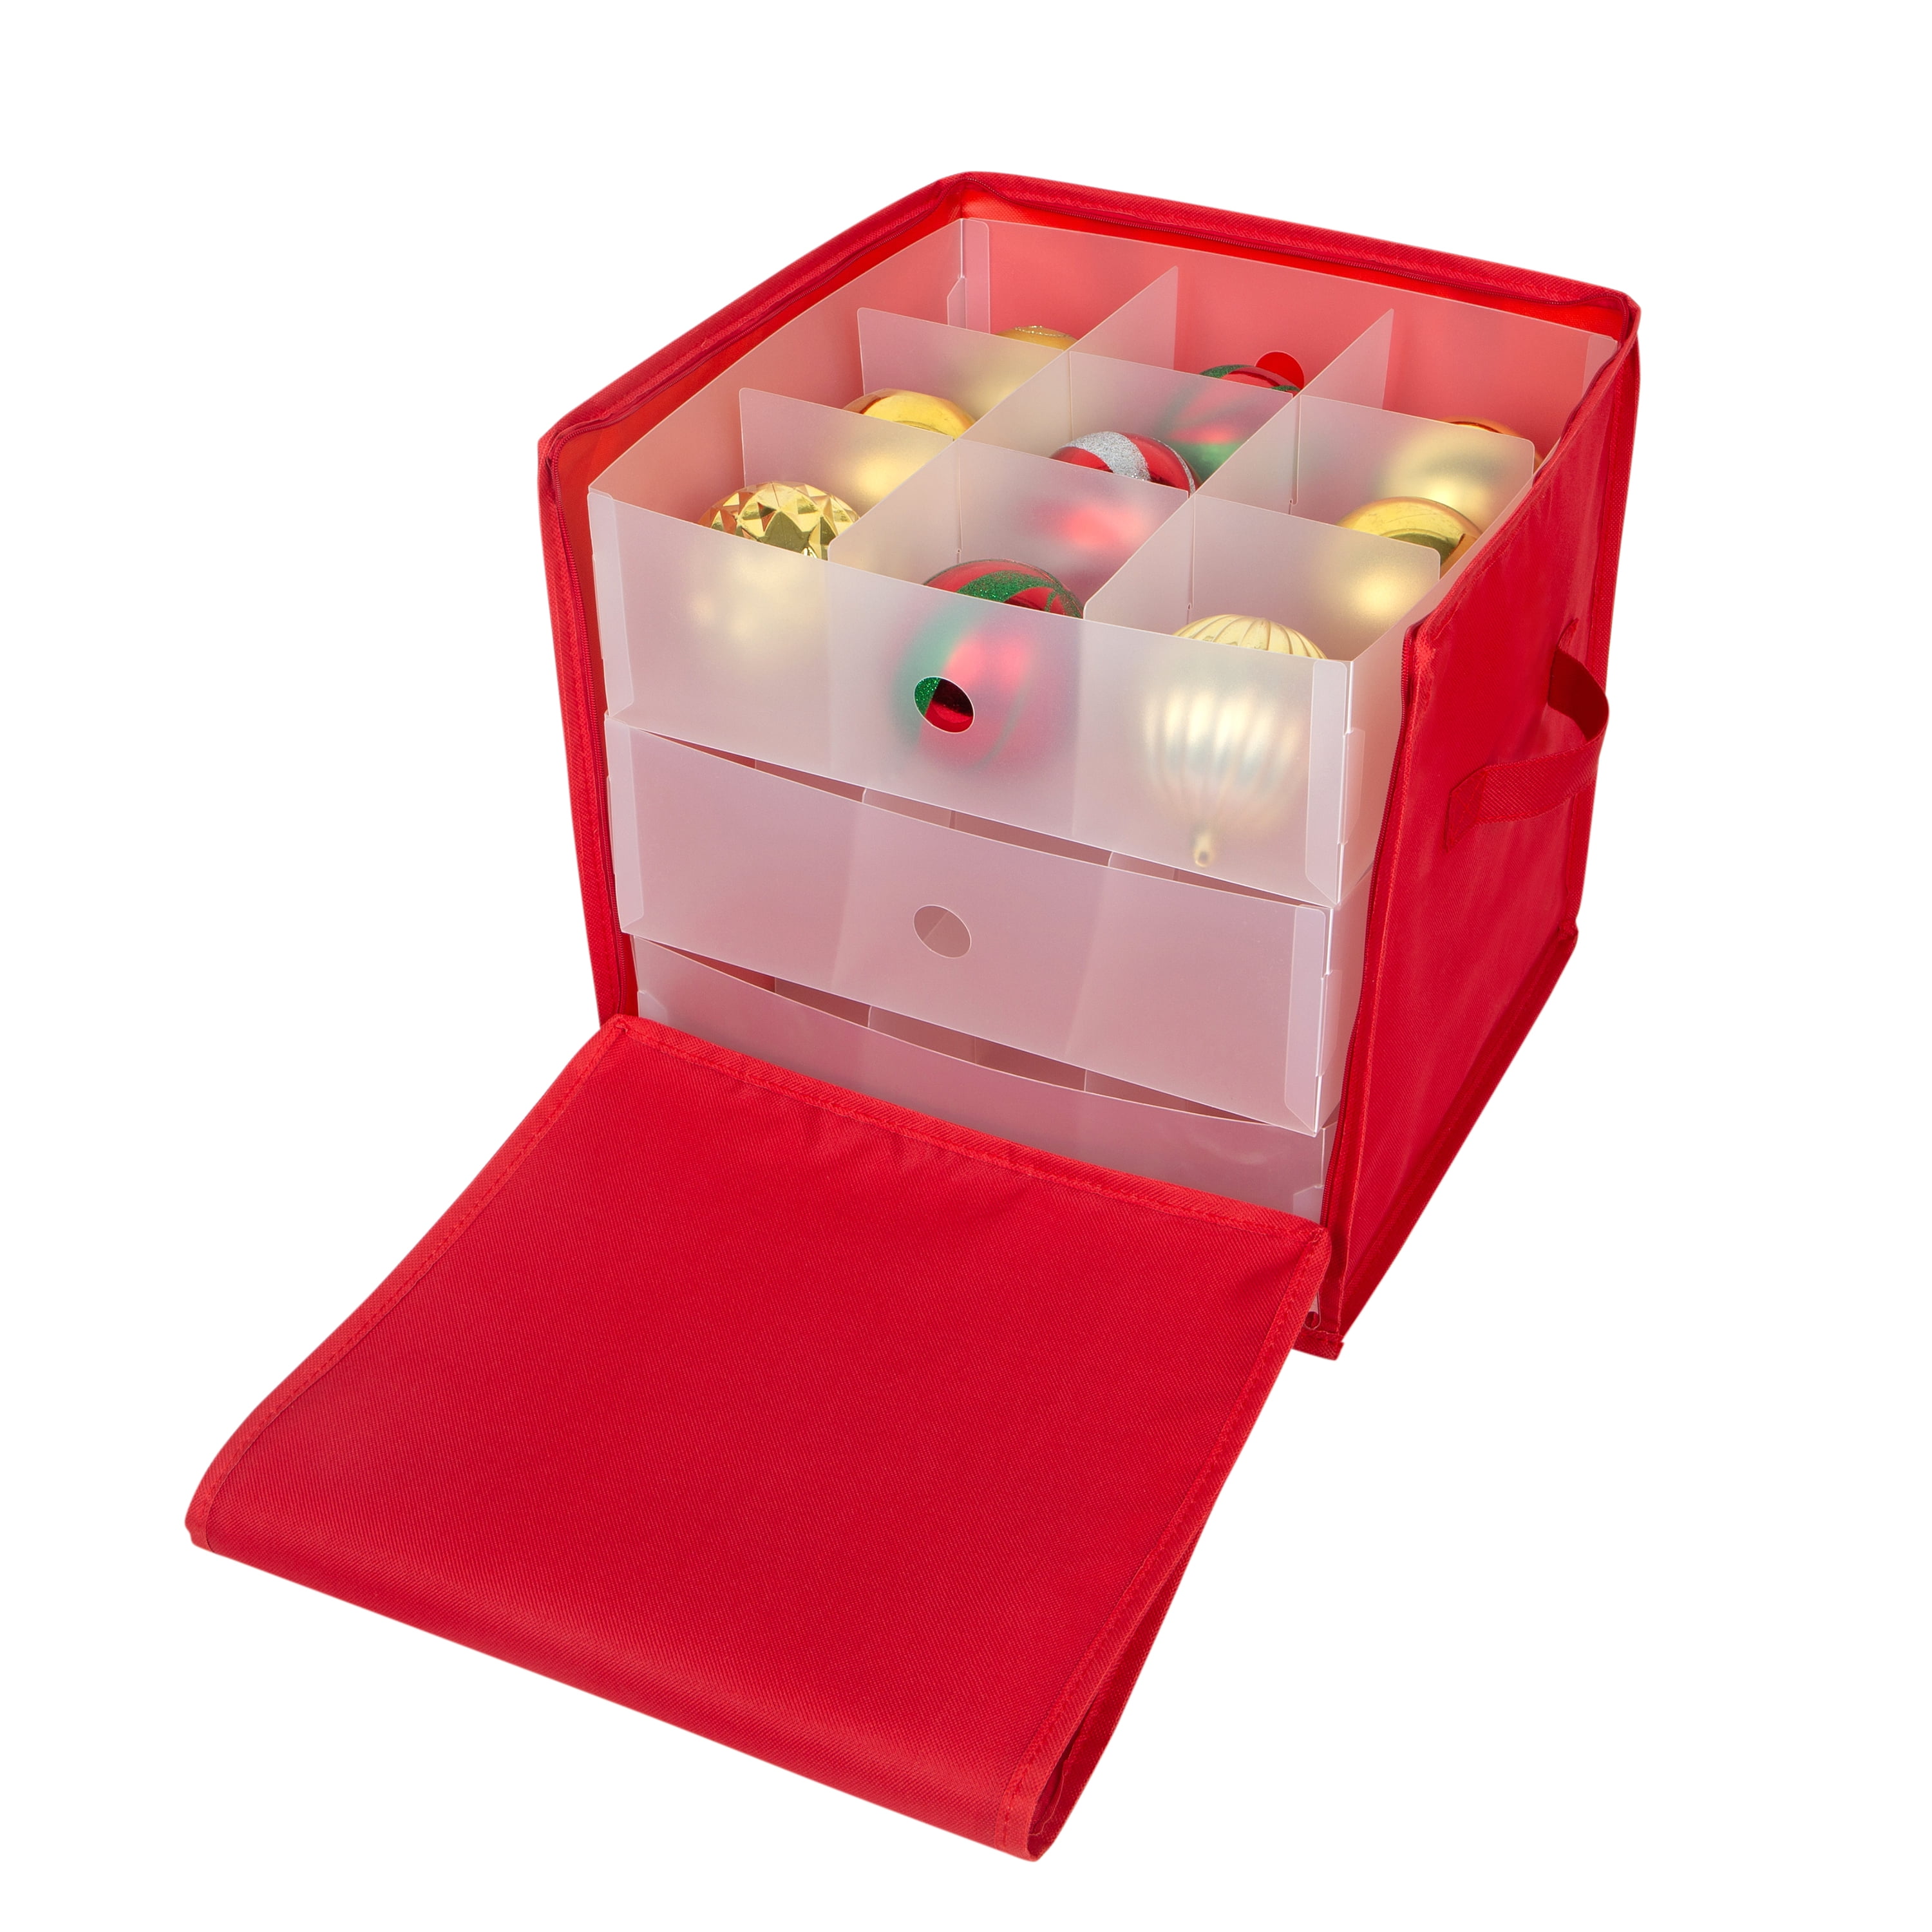 Simplify 27 Count Stackable Christmas Ornament Storage Box - Red